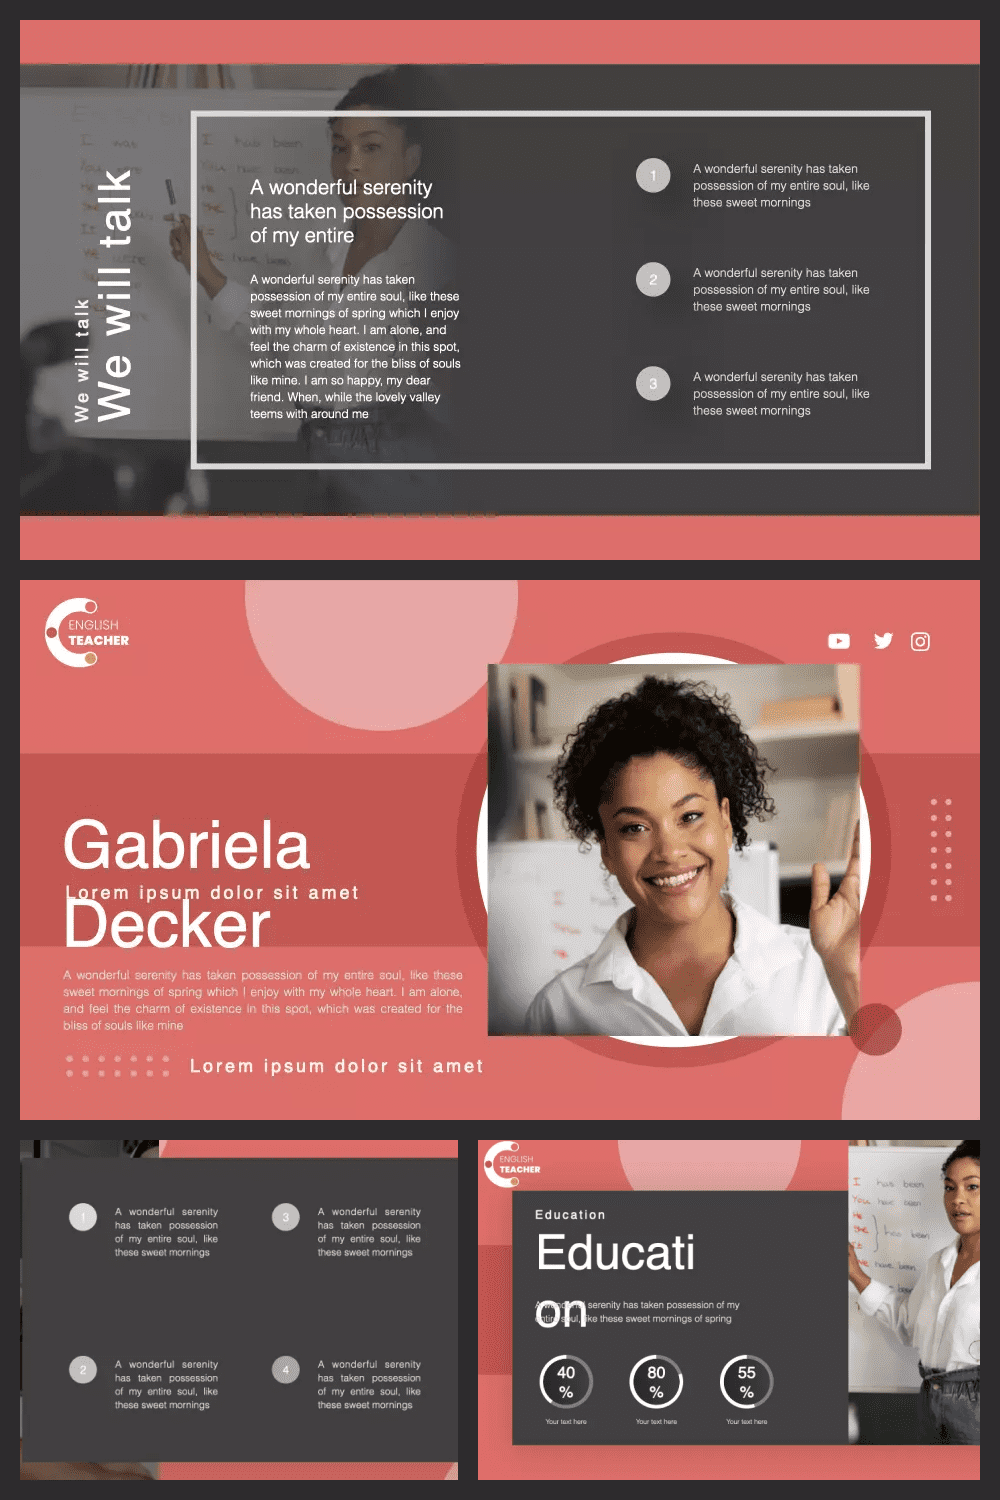 Screenshots of template pages with gray background and red background and photos of the teacher.